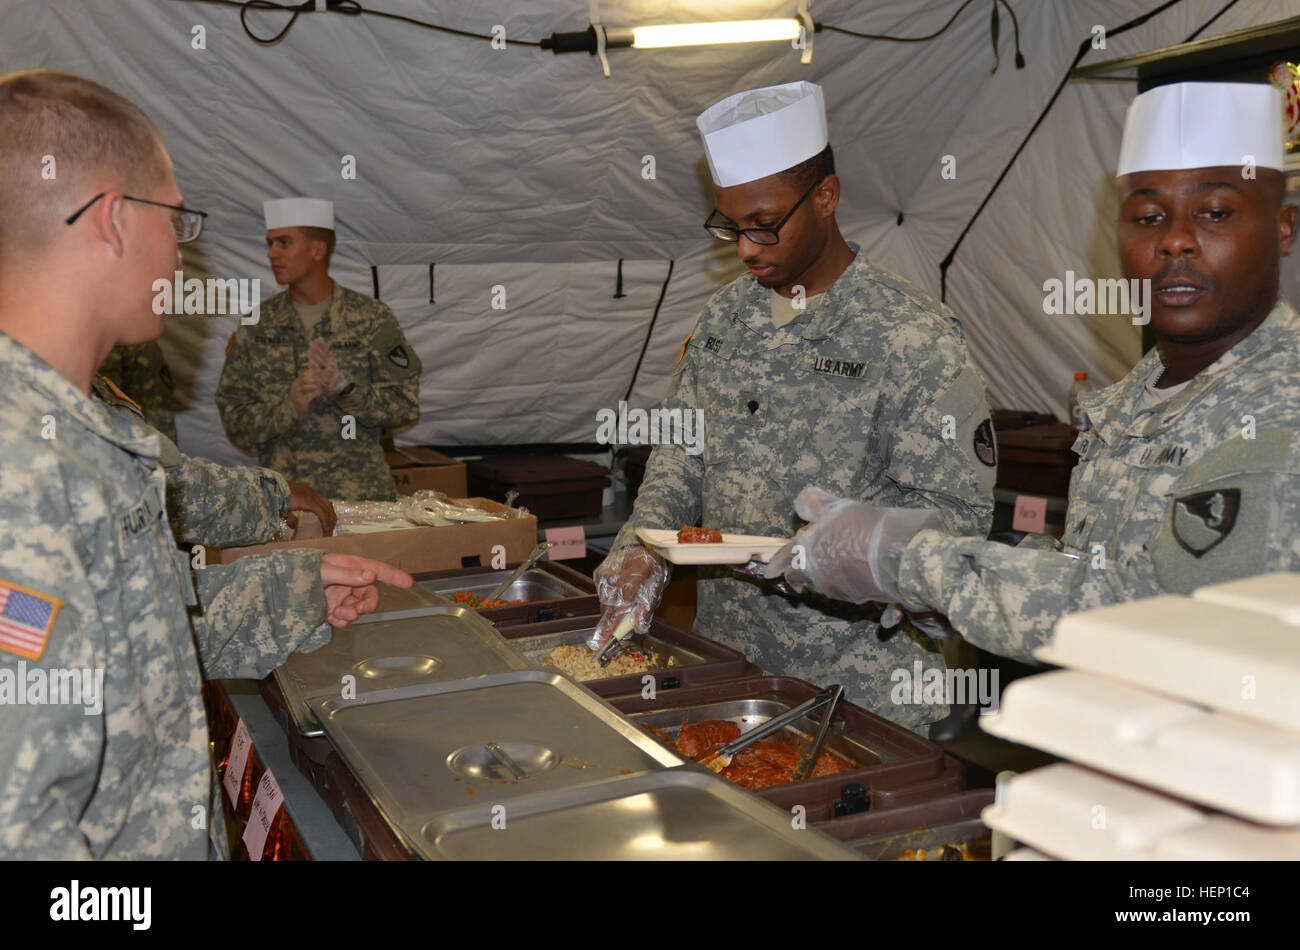 From left, Spc. Benjamin Ross, a Chicago native and food service specialist, and Sgt. William Burrell, right, the noncommissioned officer in charge of rations and a native of Union, Ala., both of Forward Support Company, 62nd Battalion, 36th Engineer, serves Soldiers food at the National Police Training Academy, Monrovia Paynesville, Liberia, during the Operation United Assistance mission Dec. 15, 2014. Operation United Assistance is a Department of Defense operation in Liberia to provide logistics, training and engineering support to U.S. Agency for International Development-led efforts to co Stock Photo